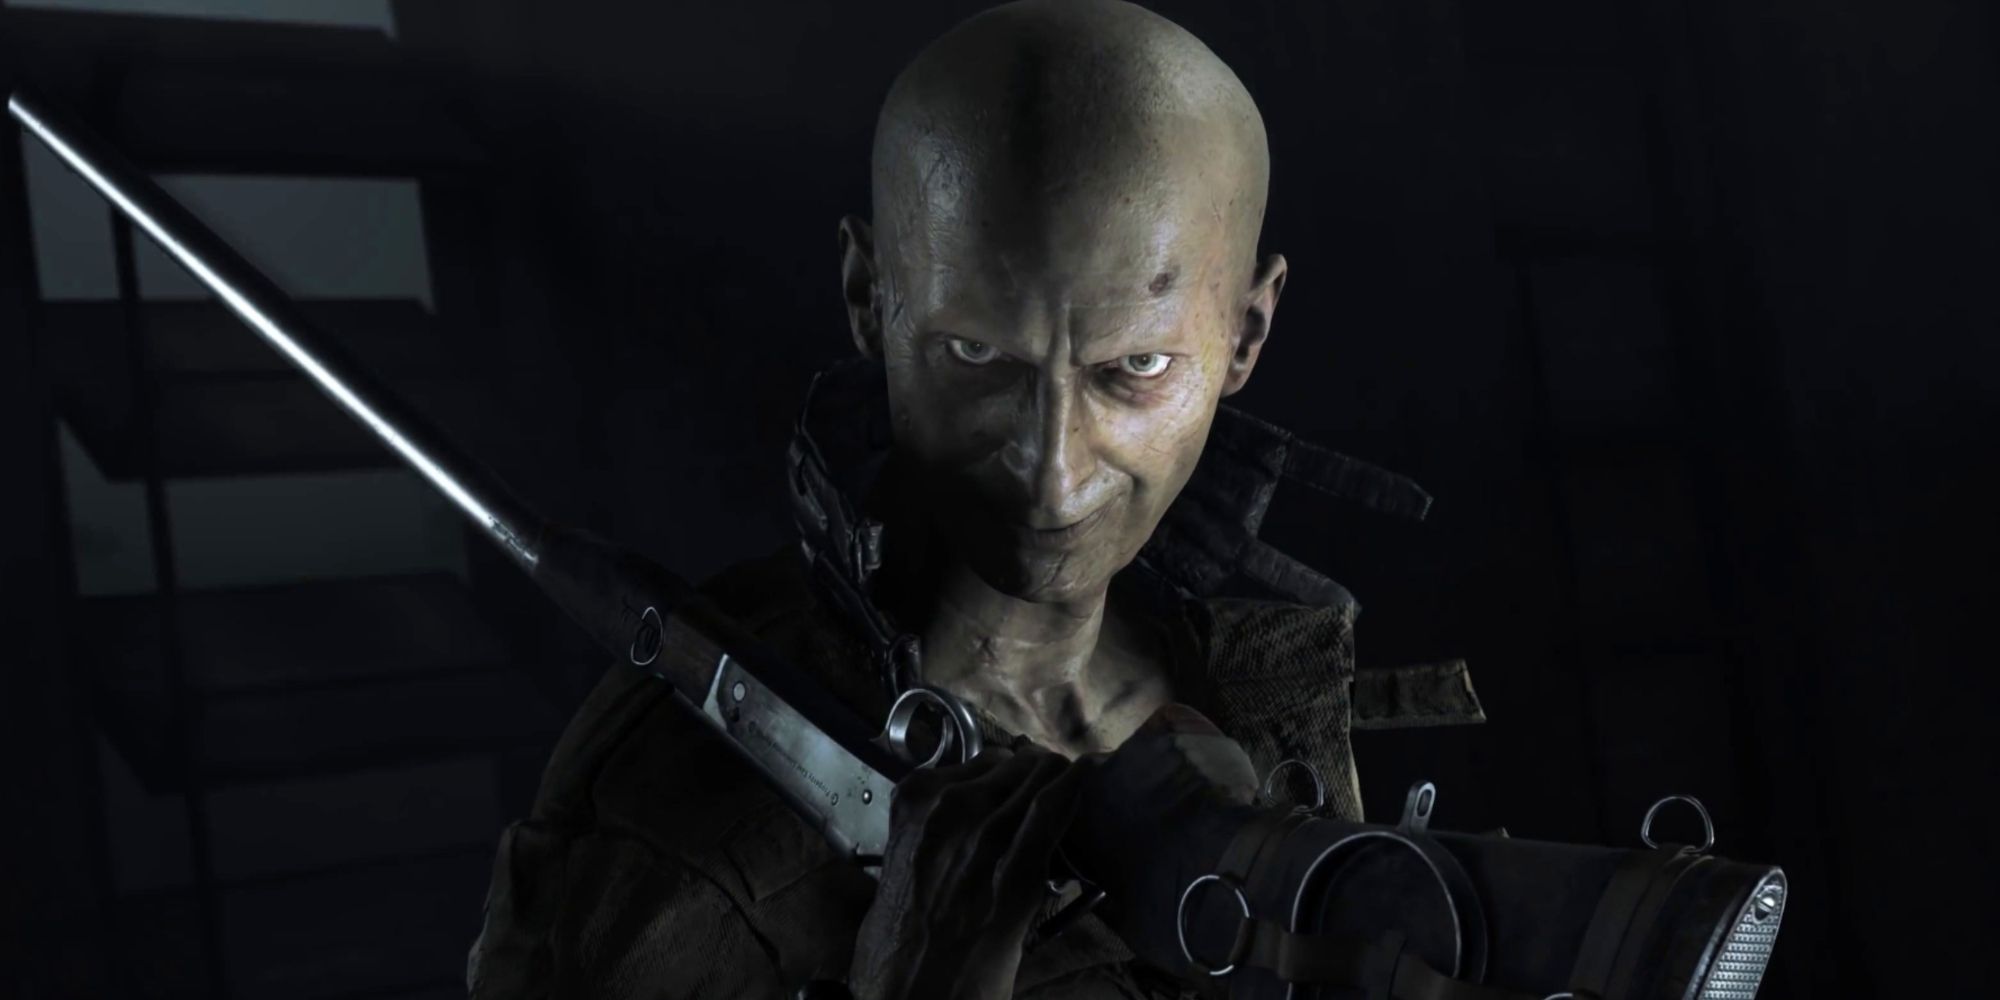 Hunt Showdown Monroe, The Committed has those crazy eyes